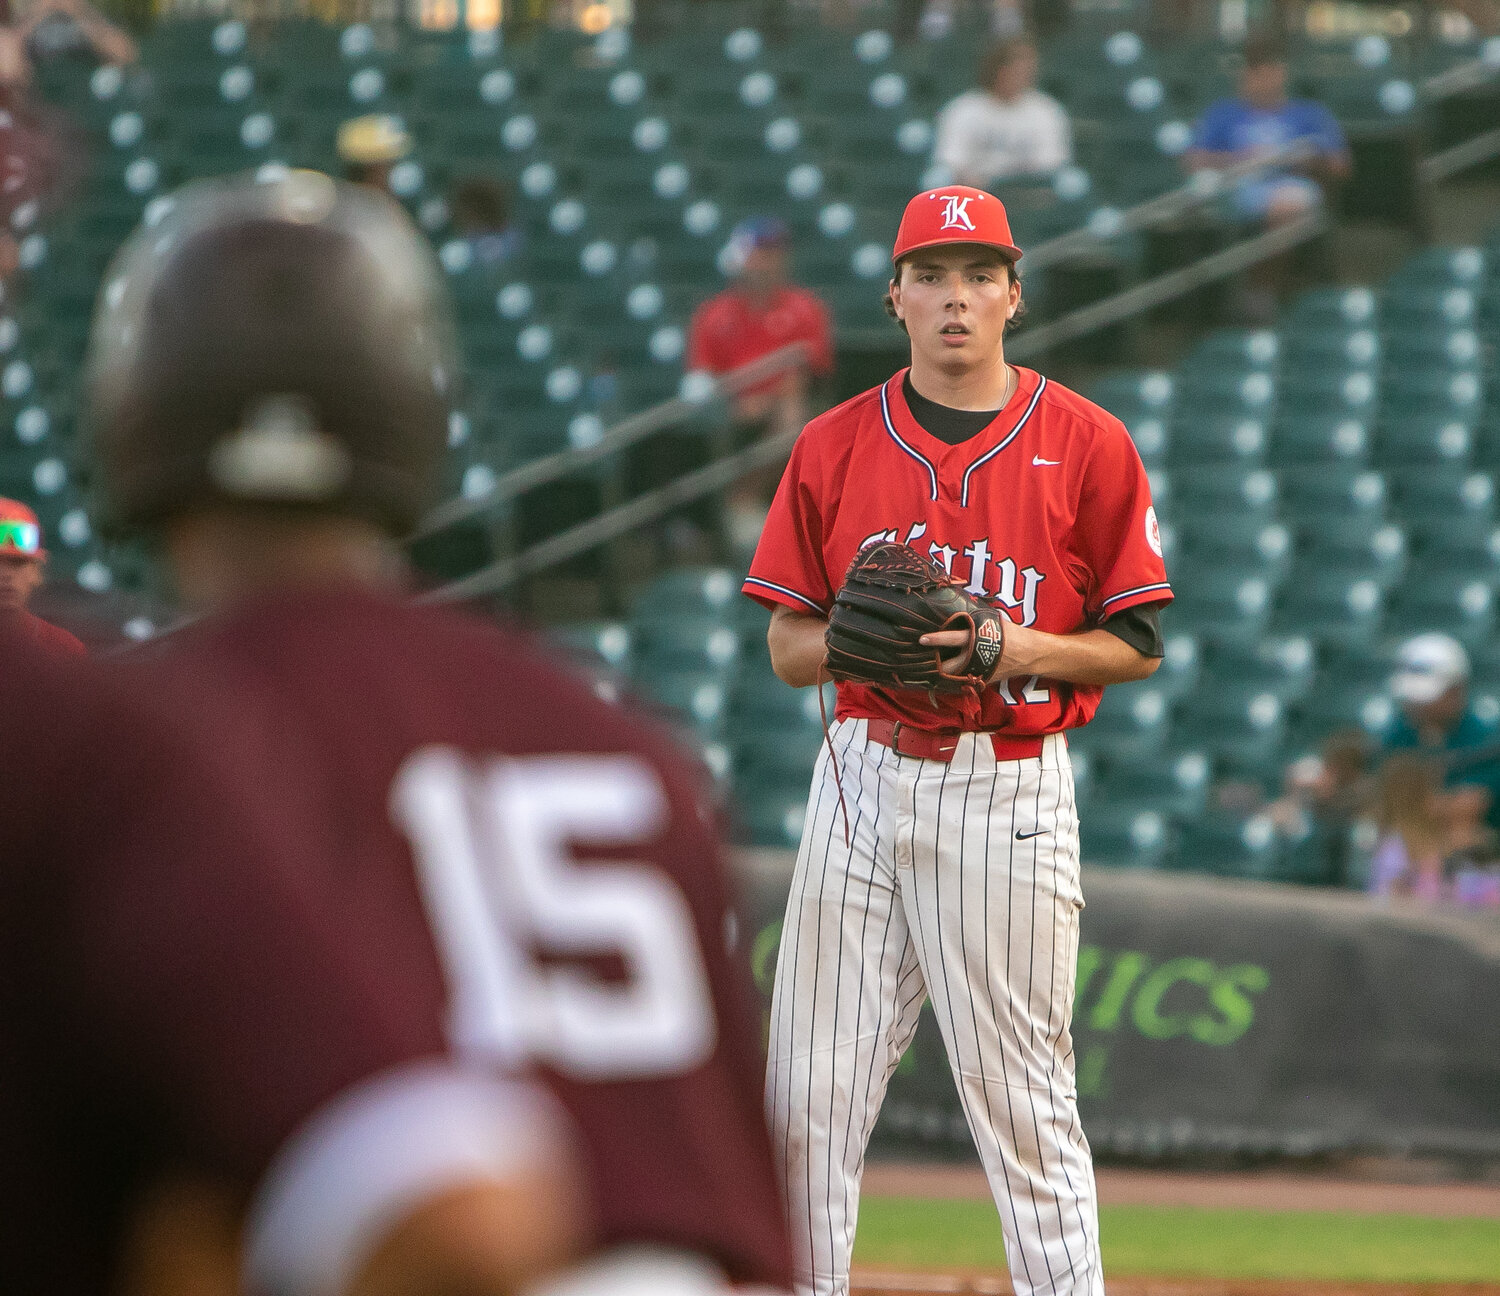 Lucas Moore looks towards third base during Friday's Regional Final between Katy and Pearland at Constellation Field in Sugar Land.